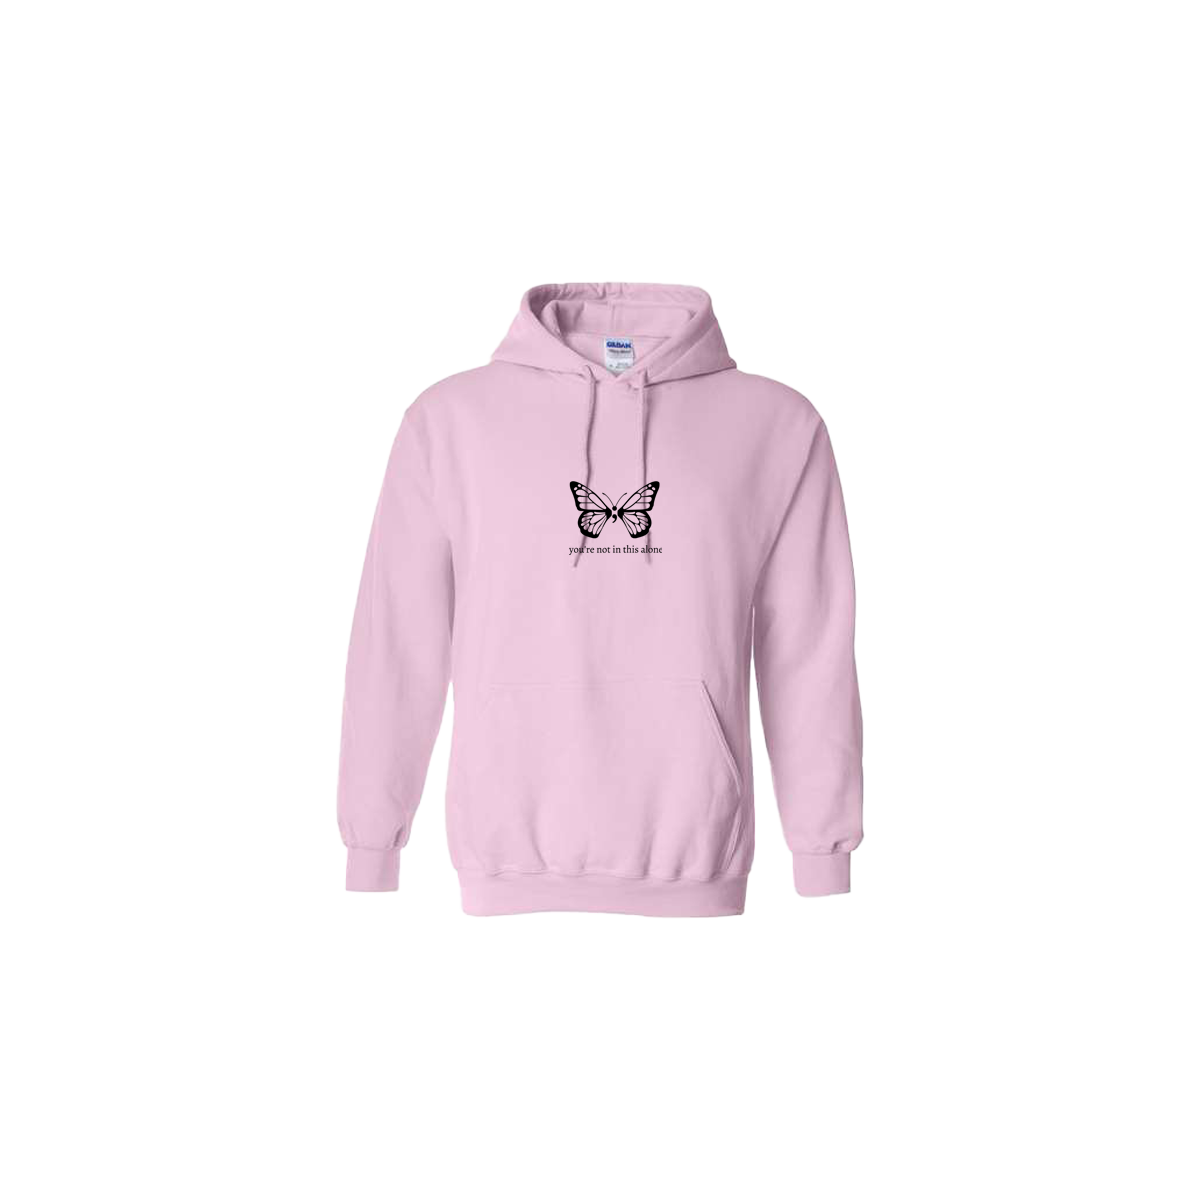 You're Not In This Alone Butterfly Embroidered Light Pink Hoodie - Mental Health Awareness Clothing